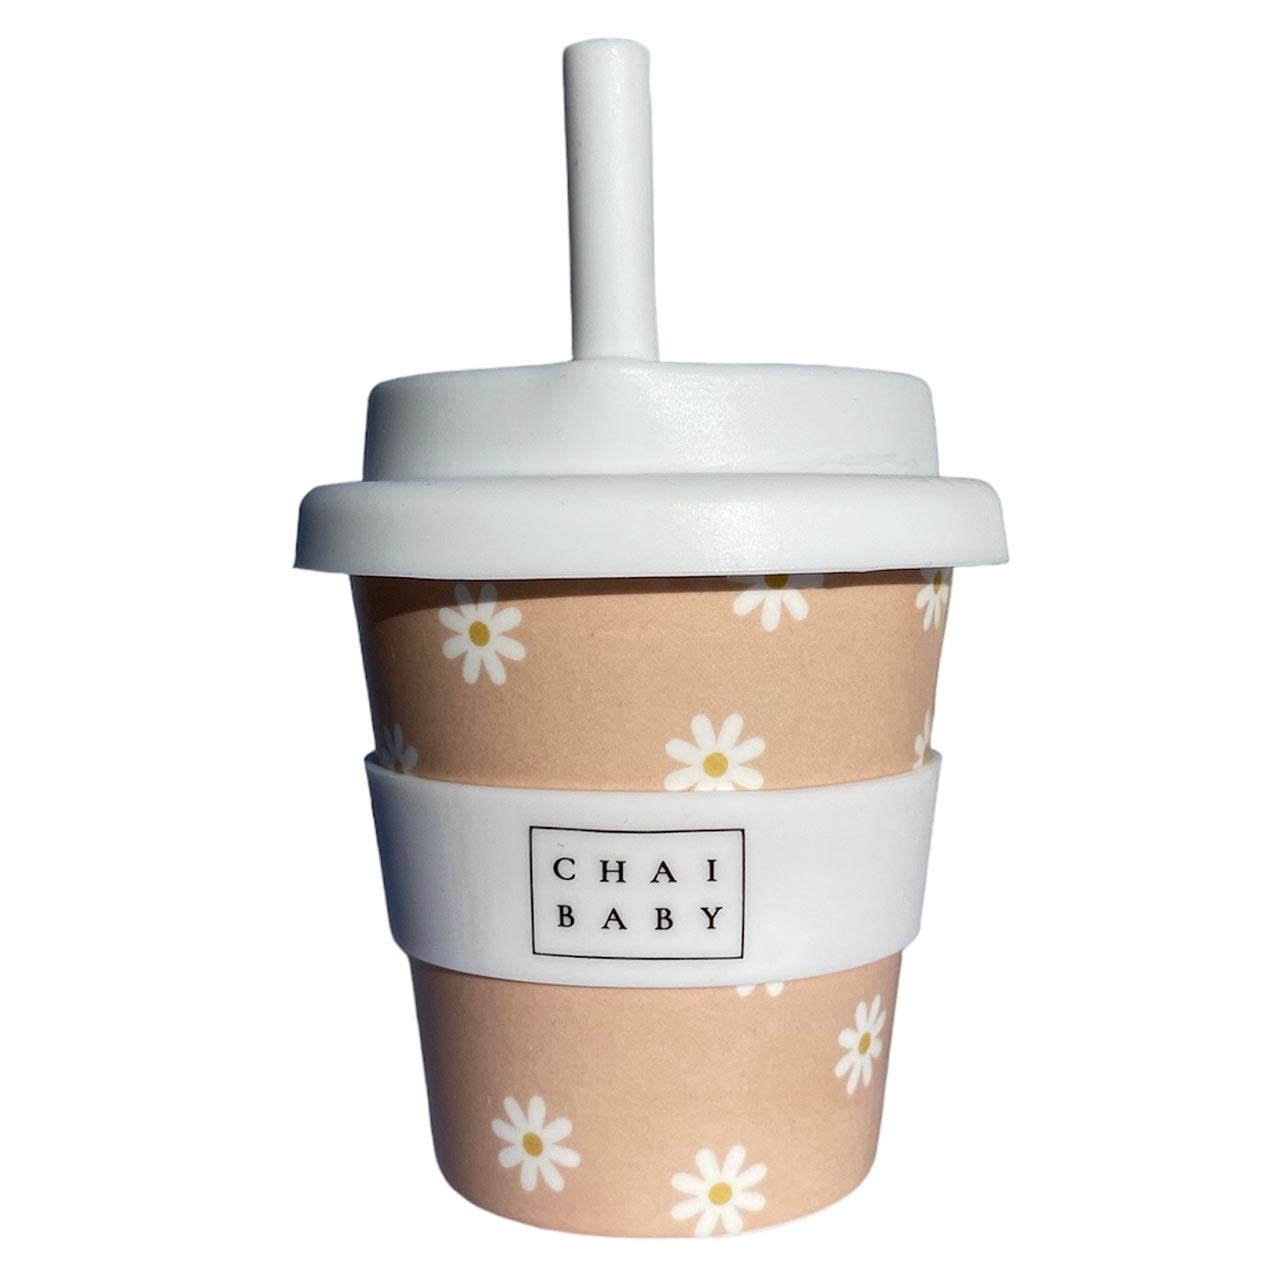 Chai Baby Natural Daisy Cup